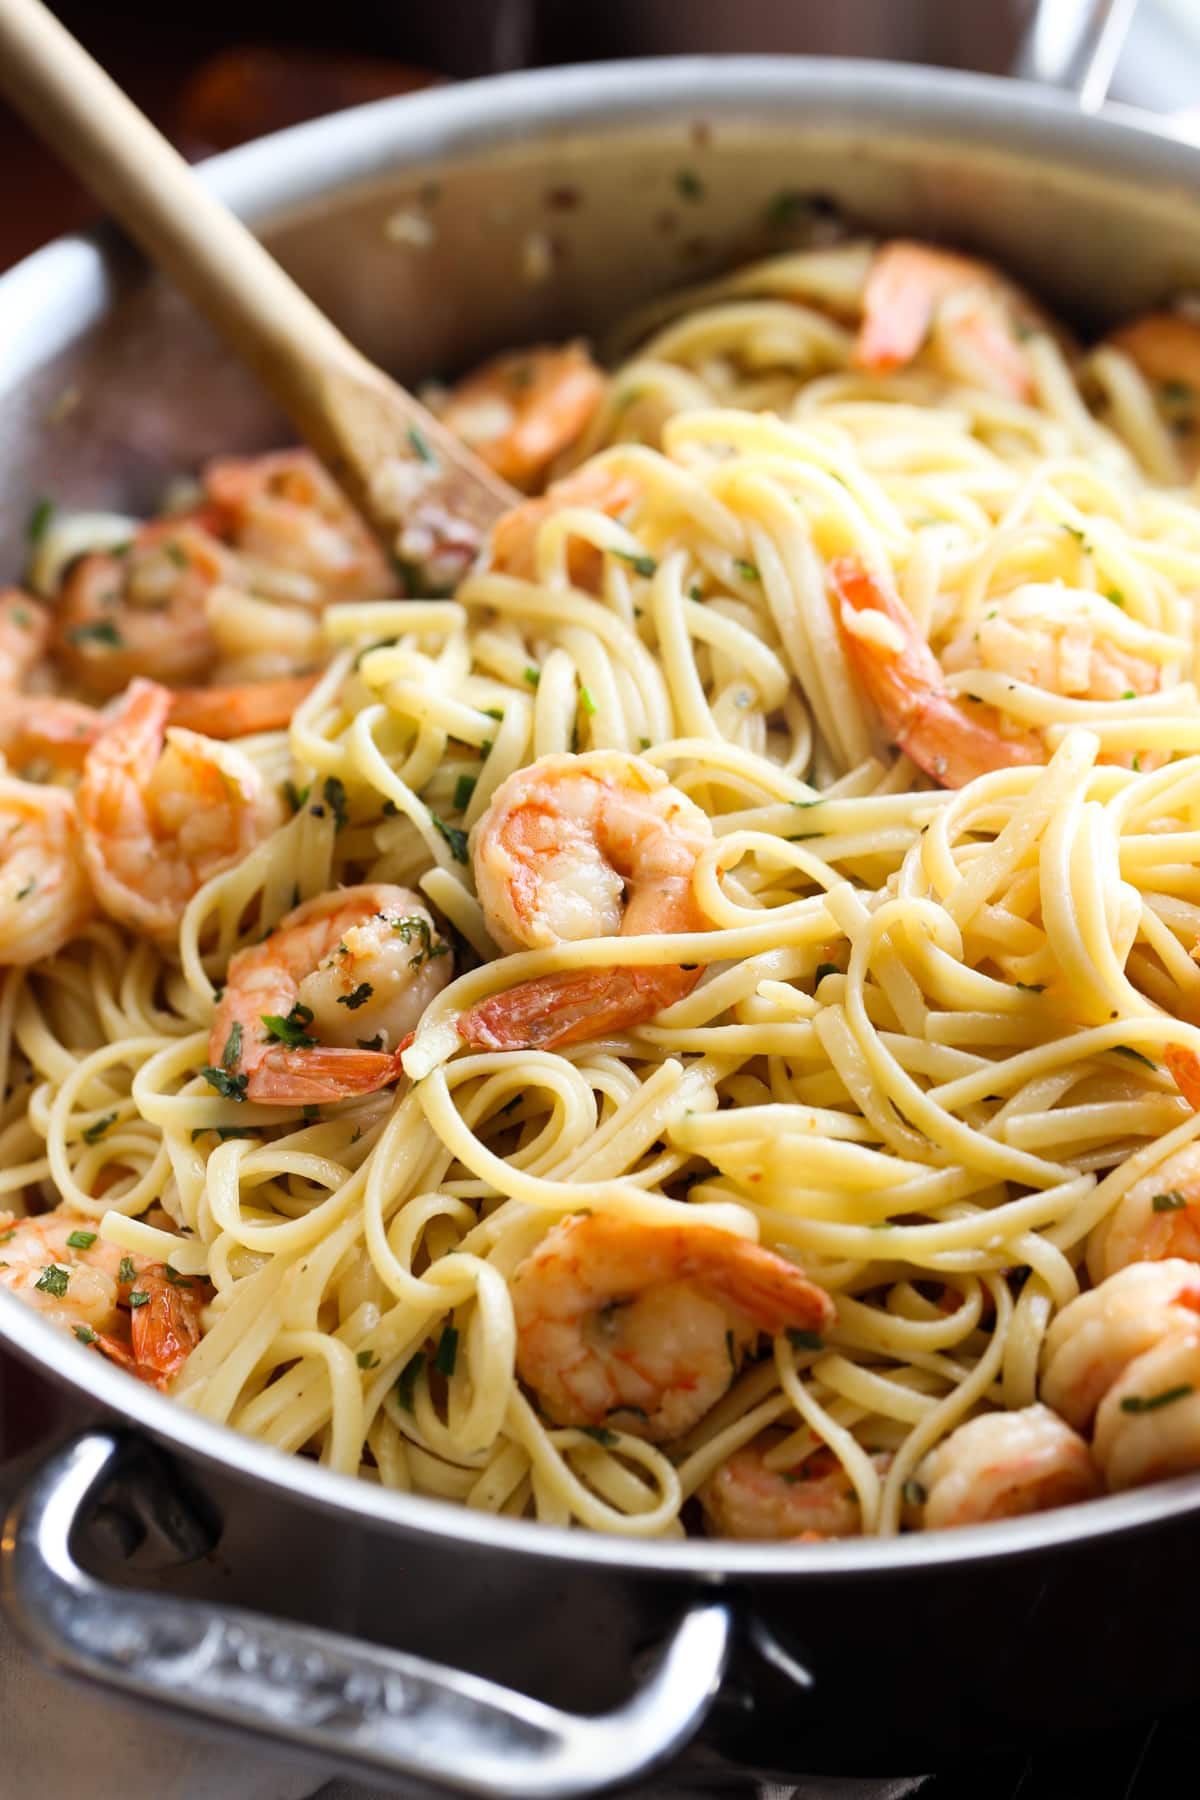 A stainless steel skillet filled with buttery pasta and shrimp